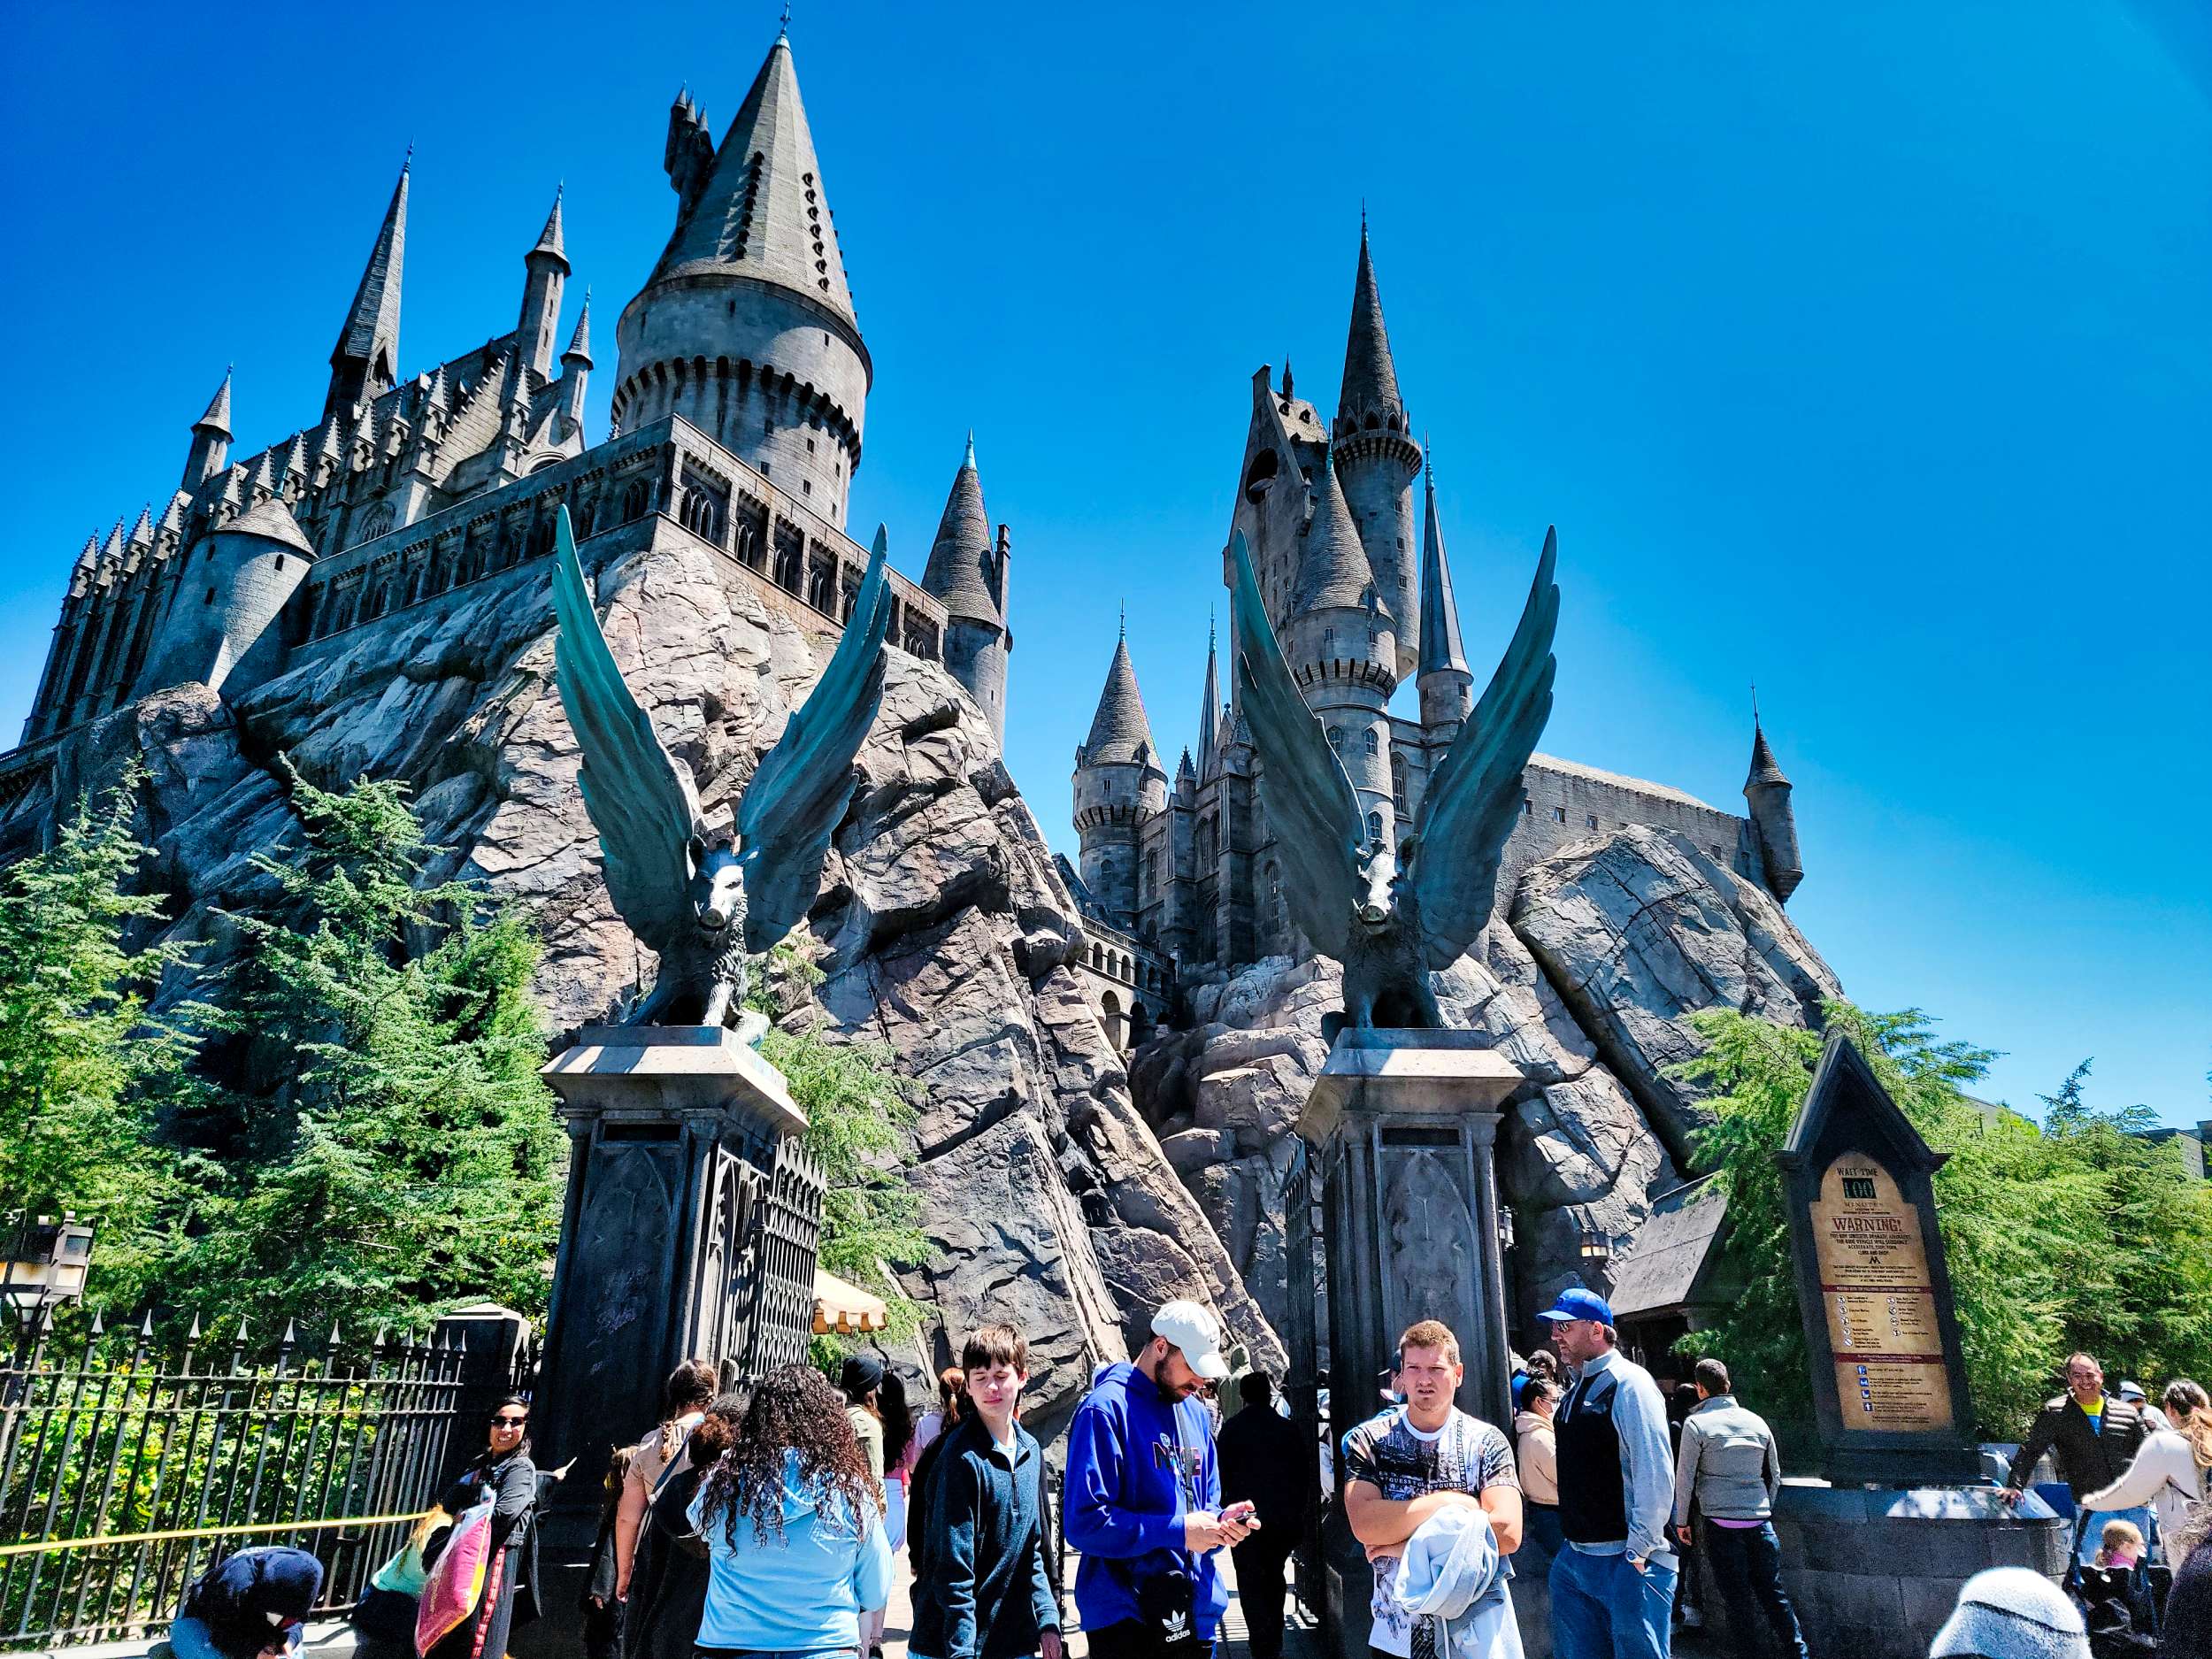 Harry Potter and the Forbidden Journey facade, Hogwarts, at Universal Studios Hollywood